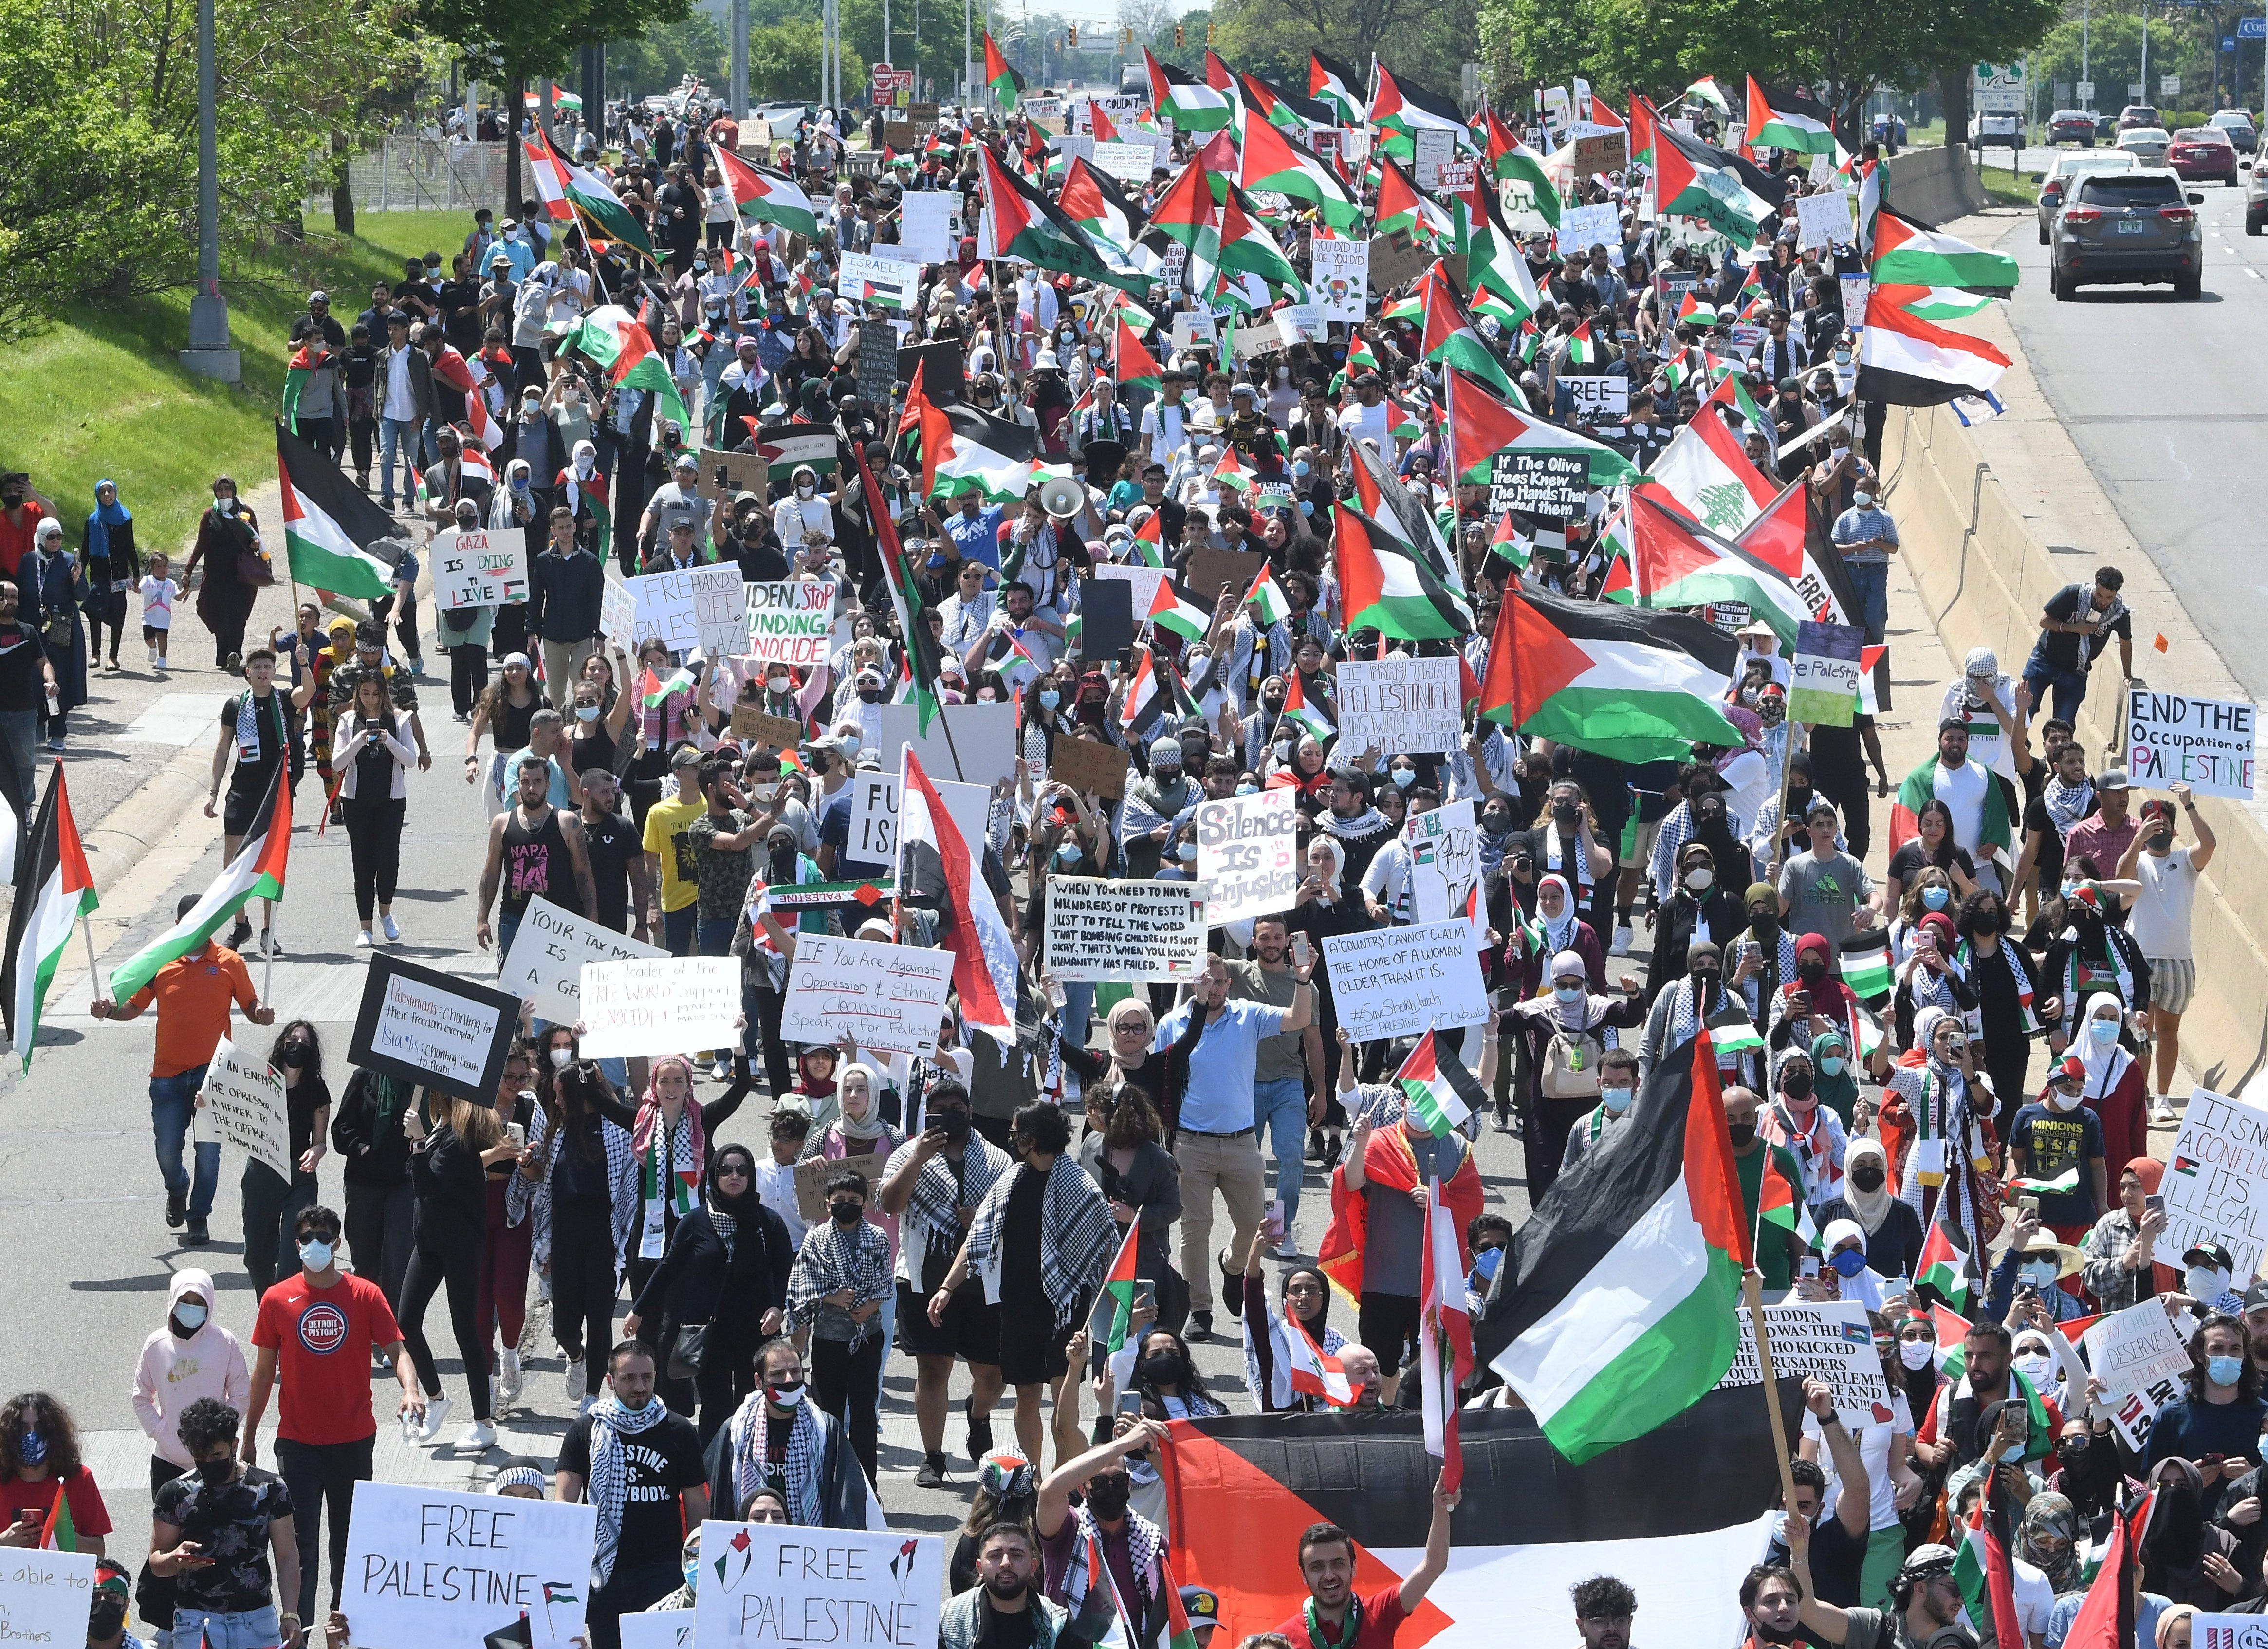 Thousands of Palestinian supporters march down eastbound Michigan Avenue during a Palestinian protest and march, at the same time President Joe Biden is visiting in another part of Dearborn, Michigan on May 18, 2021.